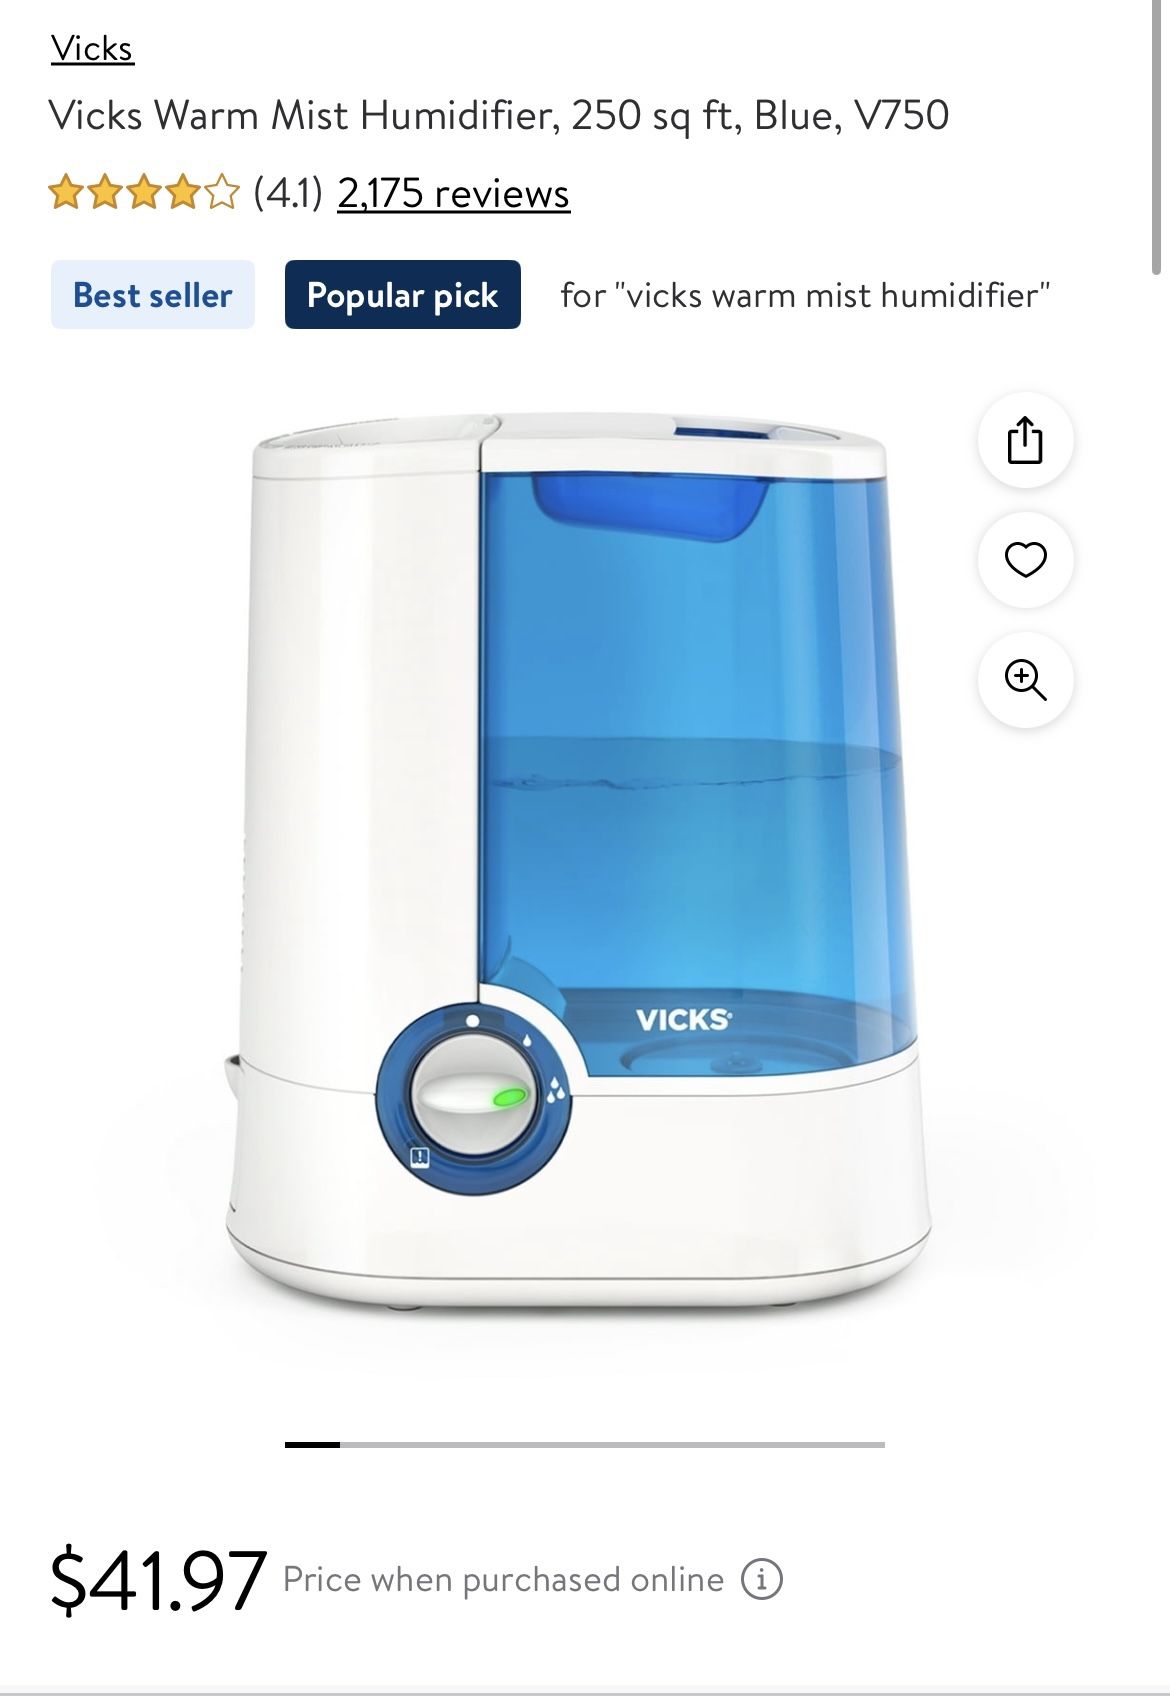 Vicks Warm Mist Humidifier, 250 sq ft, Blue, V750 (only used one time when we need